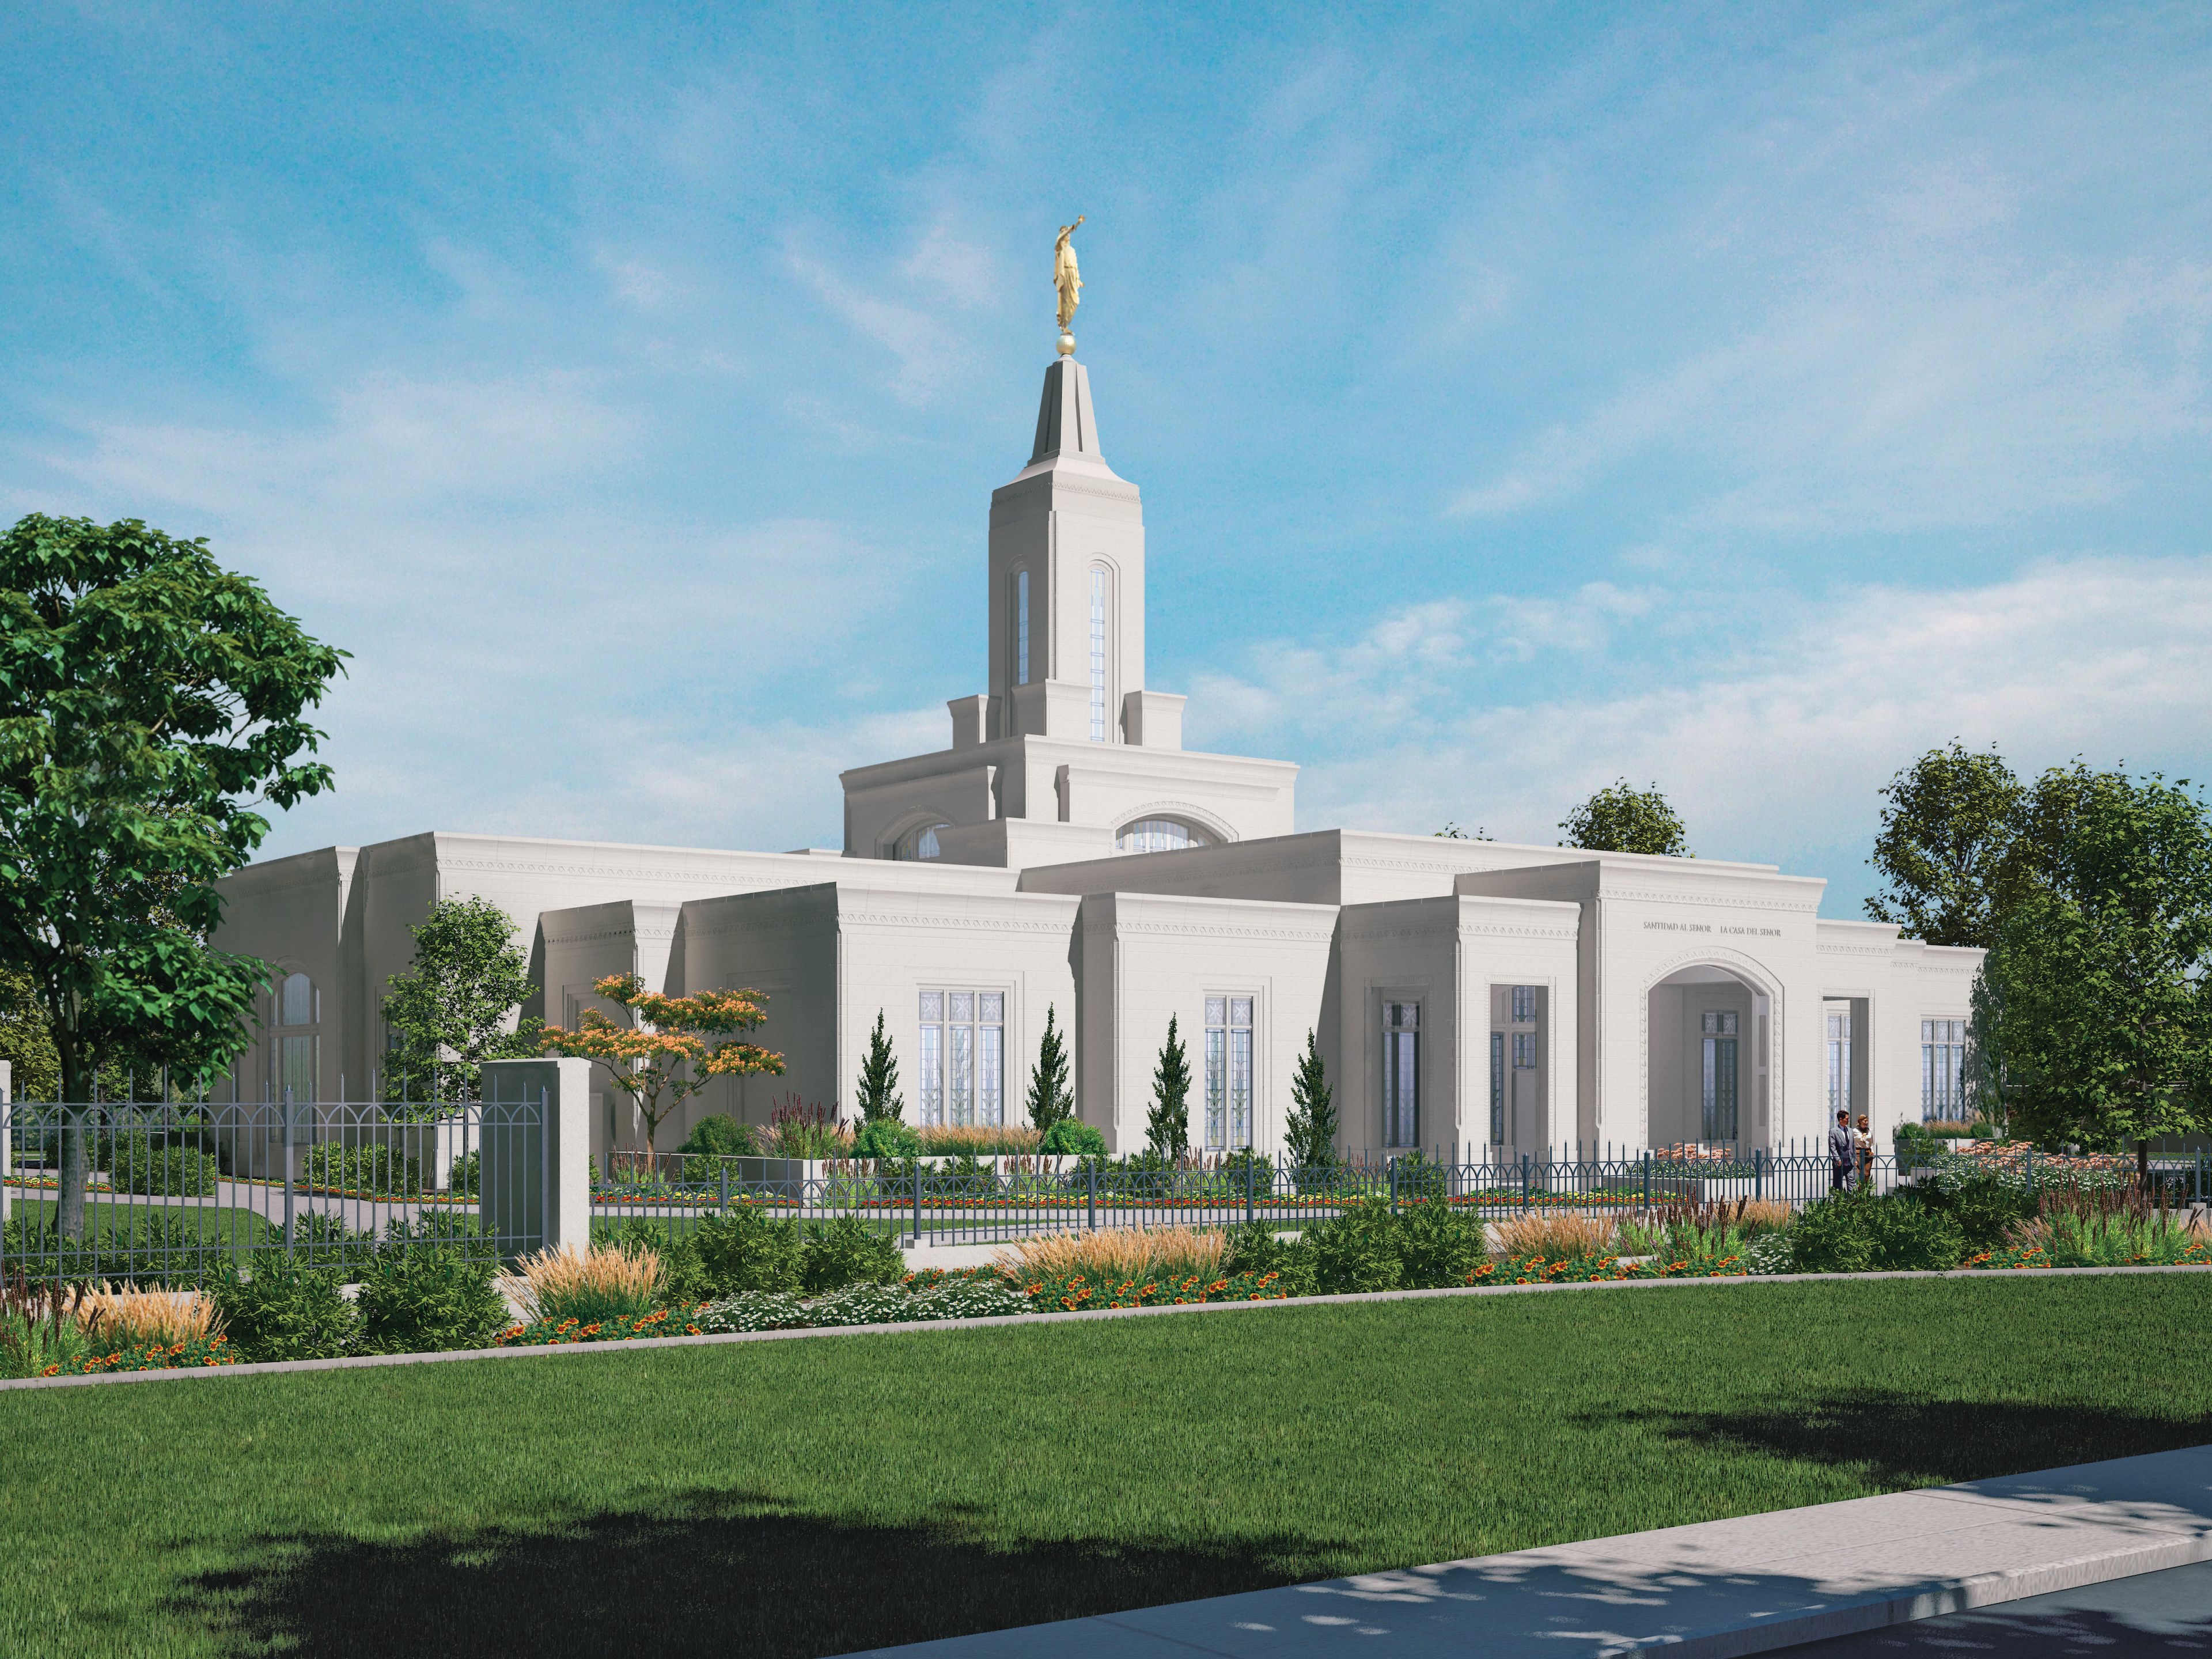 An artist’s rendering of the Córdoba Argentina Temple.